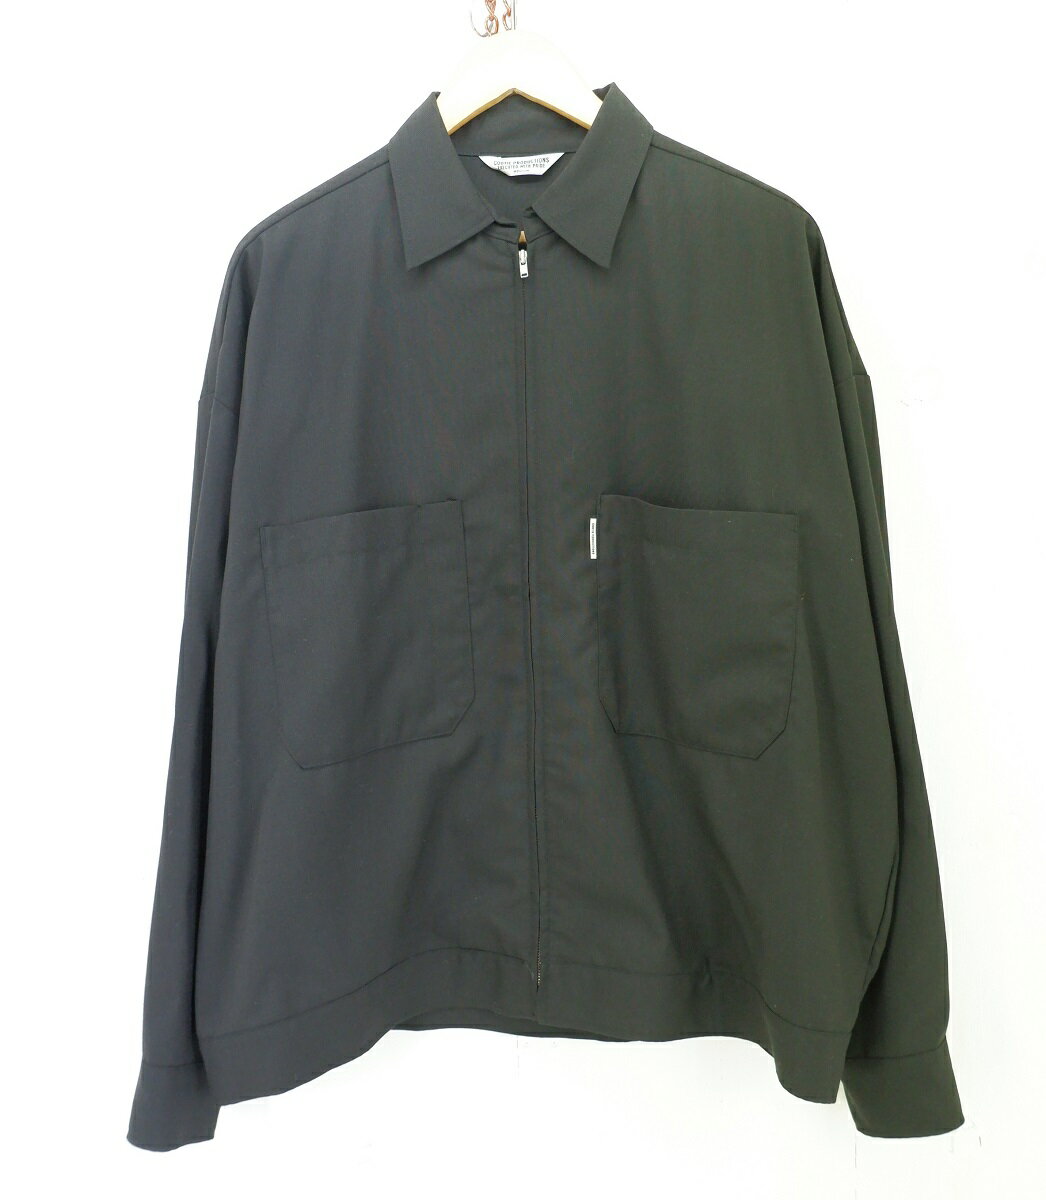 COOTIE PRODUCTIONS 22AW T/W WORK JACKET size：M クーティープロダクションズ ワークジャケット ブルゾン アウター ブラック CTE-22A203 Made in Japan